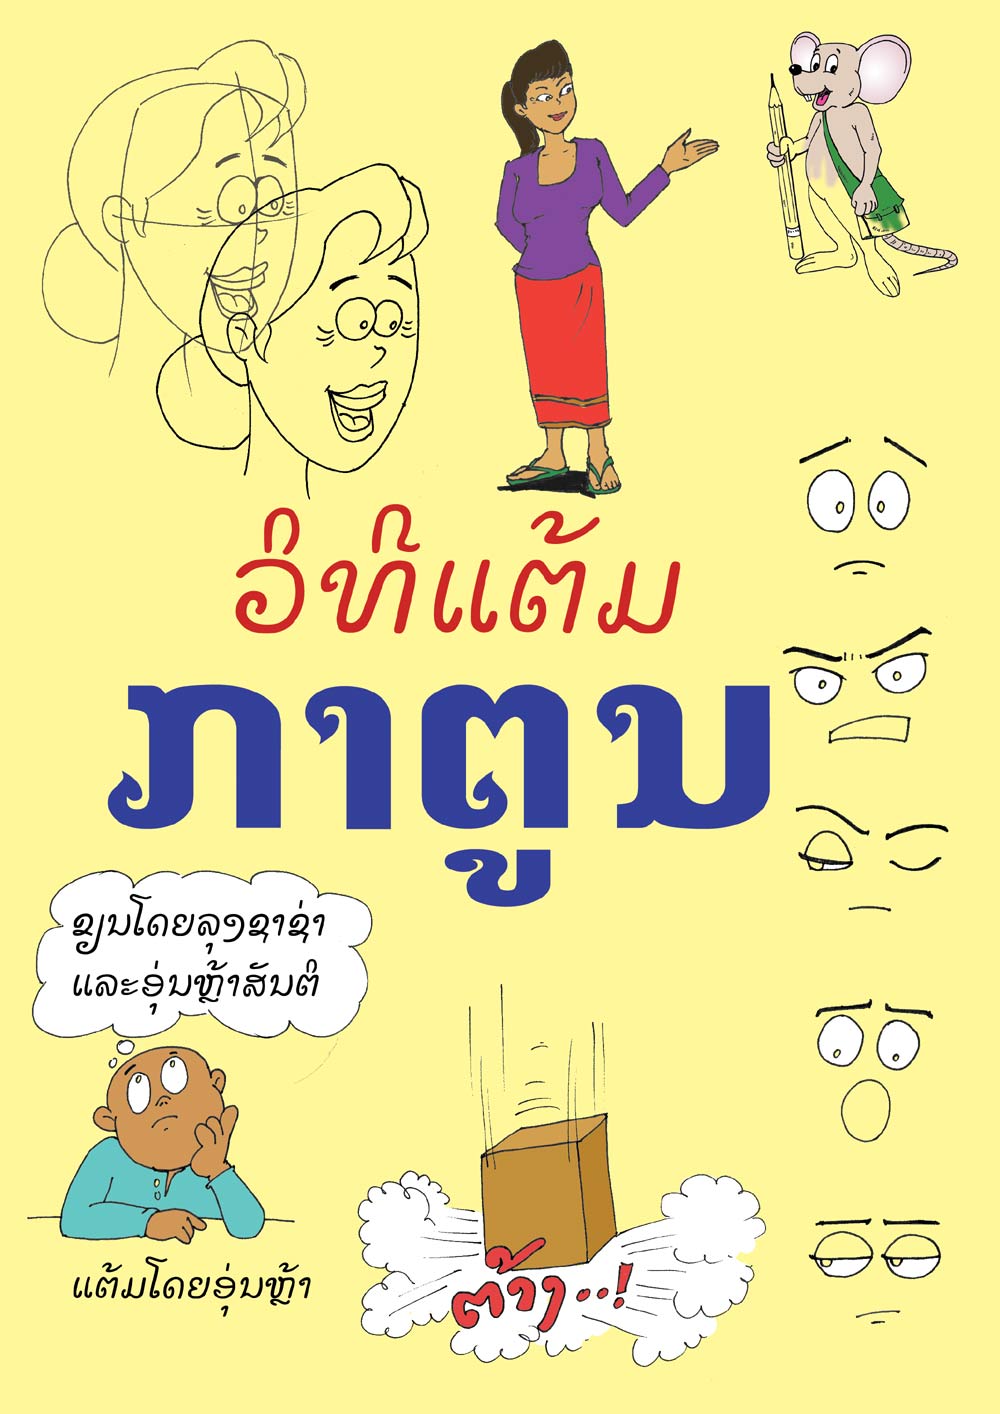 How to Draw Cartoons large book cover, published in Lao language